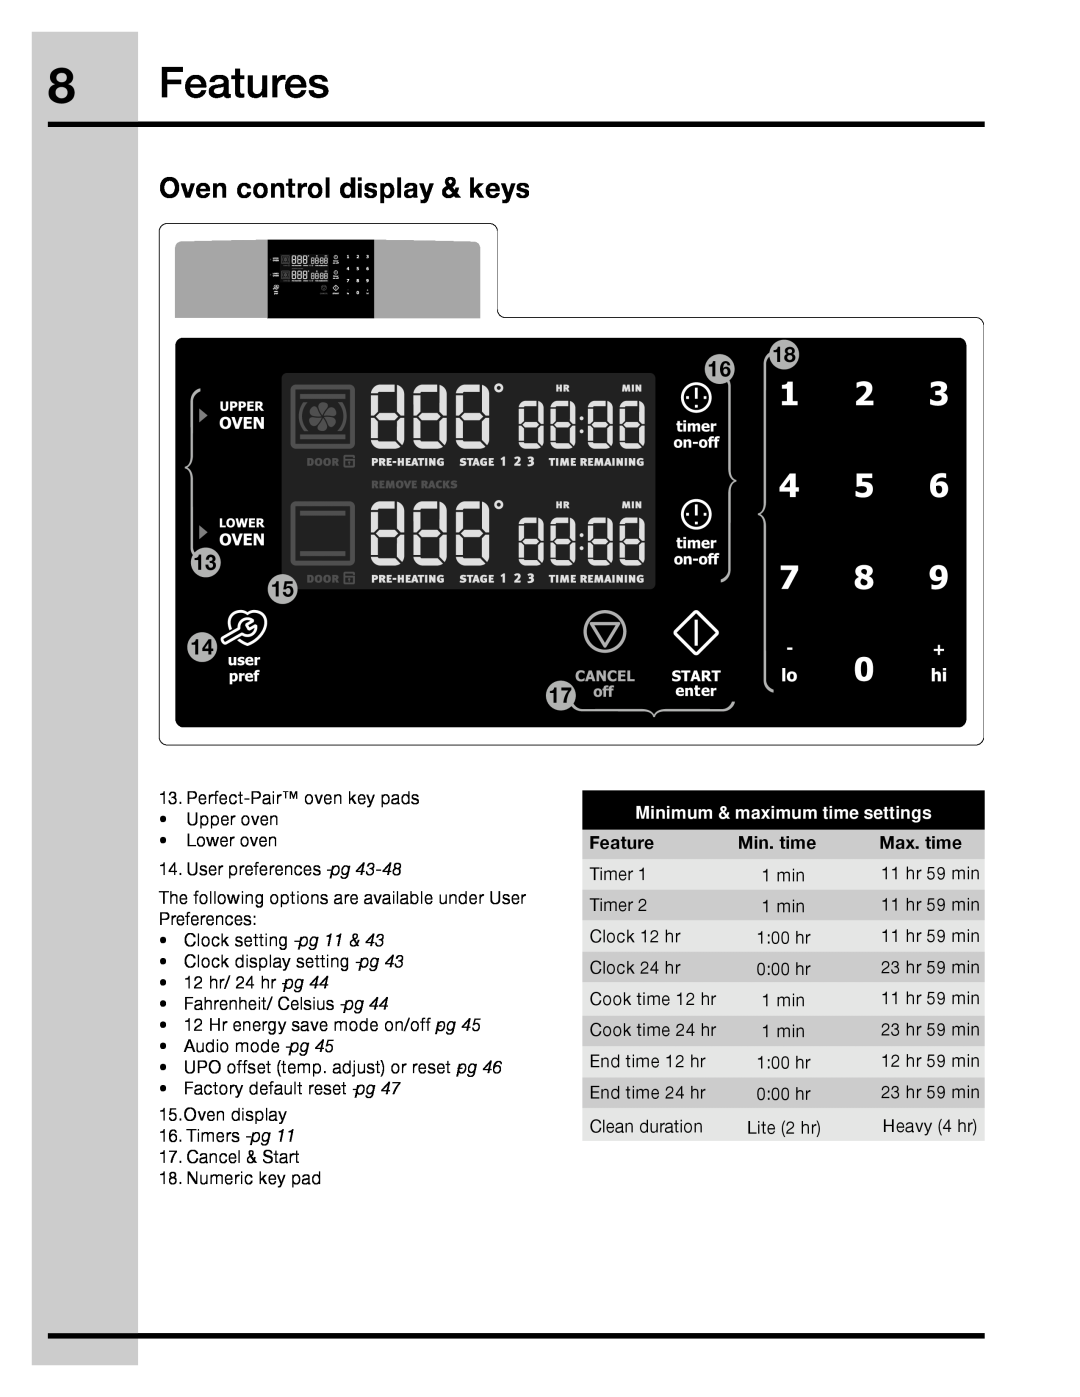 Electrolux 316471113 manual Features, Oven control display & keys, Min. time, Max. time, Minimum & maximum time settings 